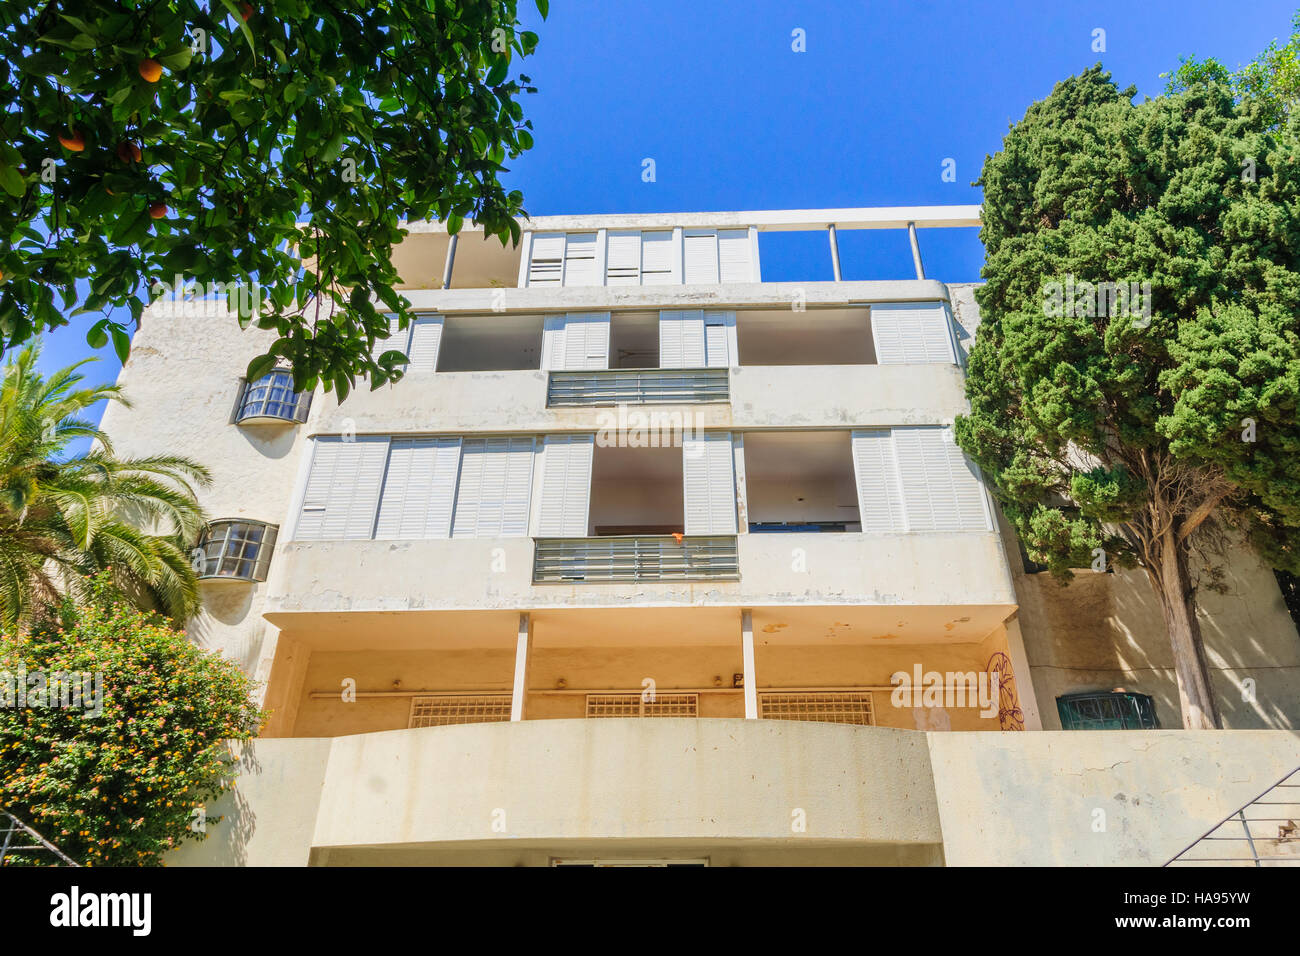 TEL AVIV, ISRAEL - MAY 15, 2015: A Bauhaus style house, in Tel Aviv, Israel. The white city of Tel Aviv is a UNESCO a World Cultural Heritage site Stock Photo